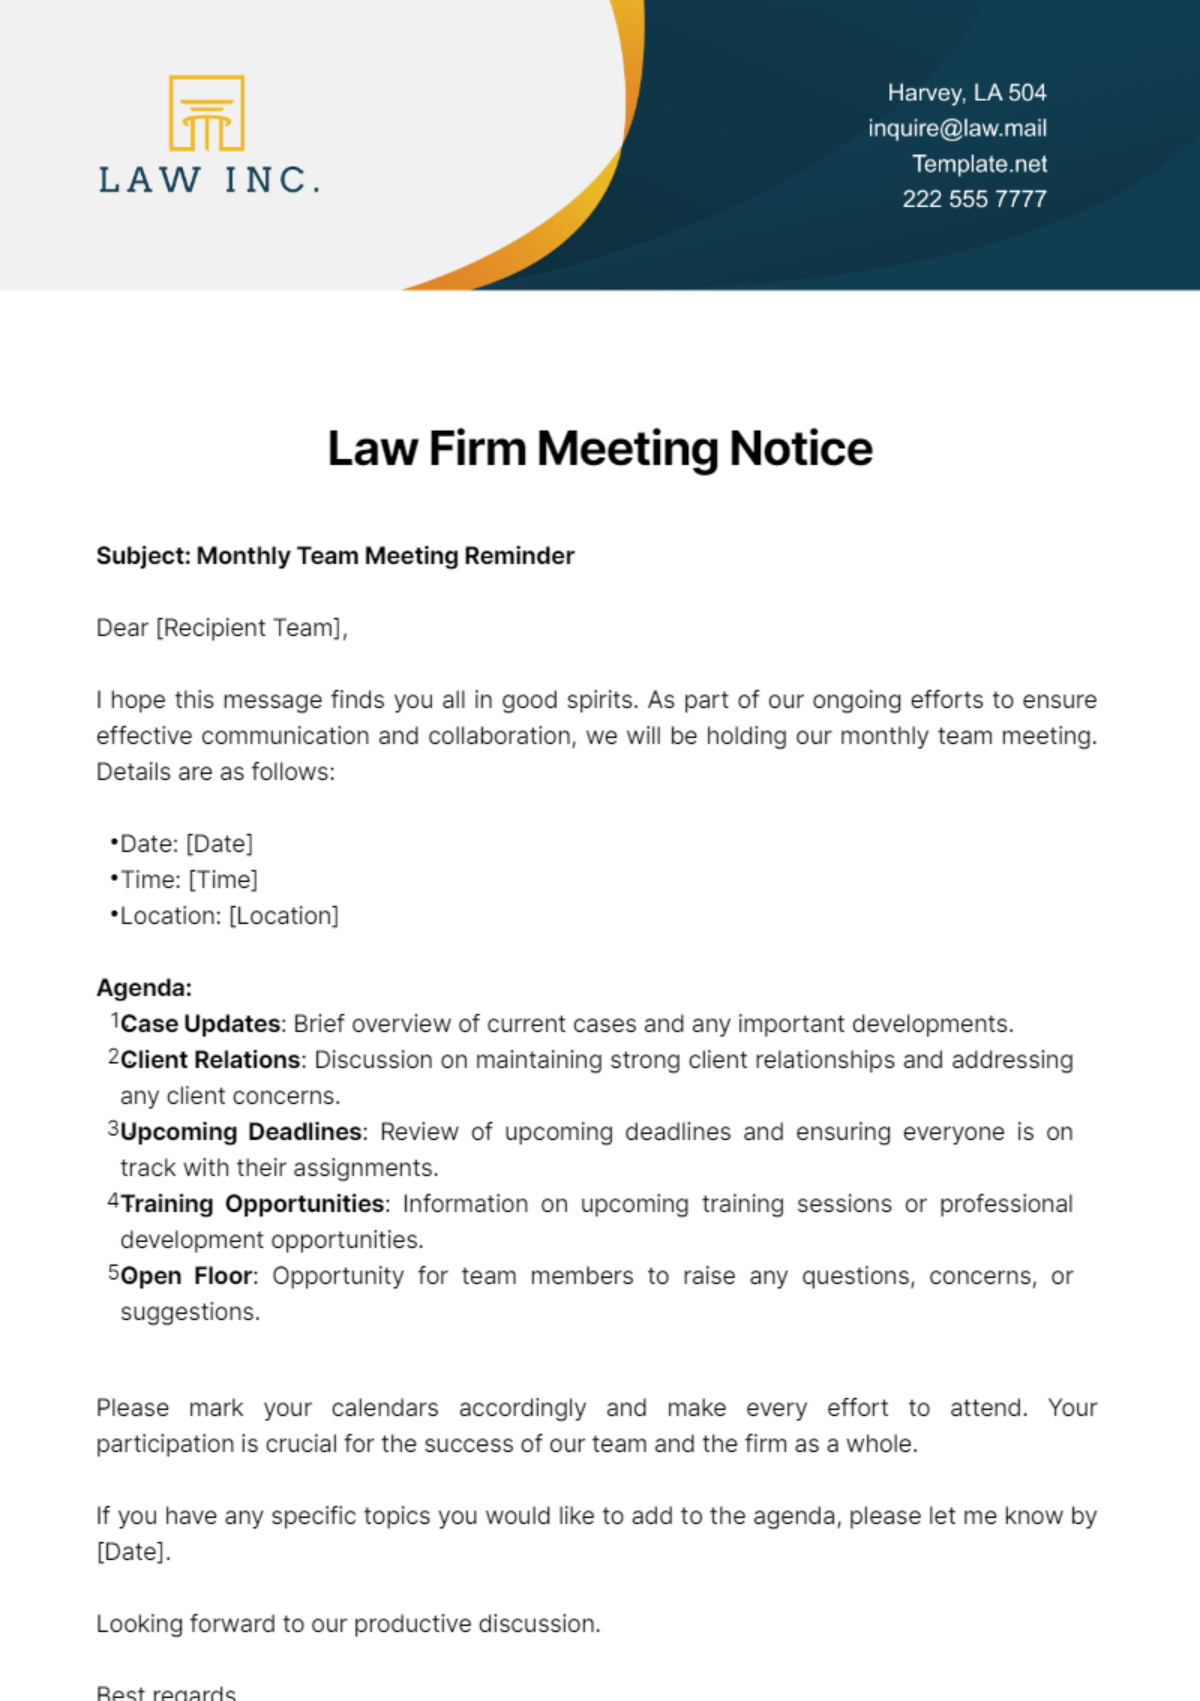 Free Law Firm Meeting Notice Template